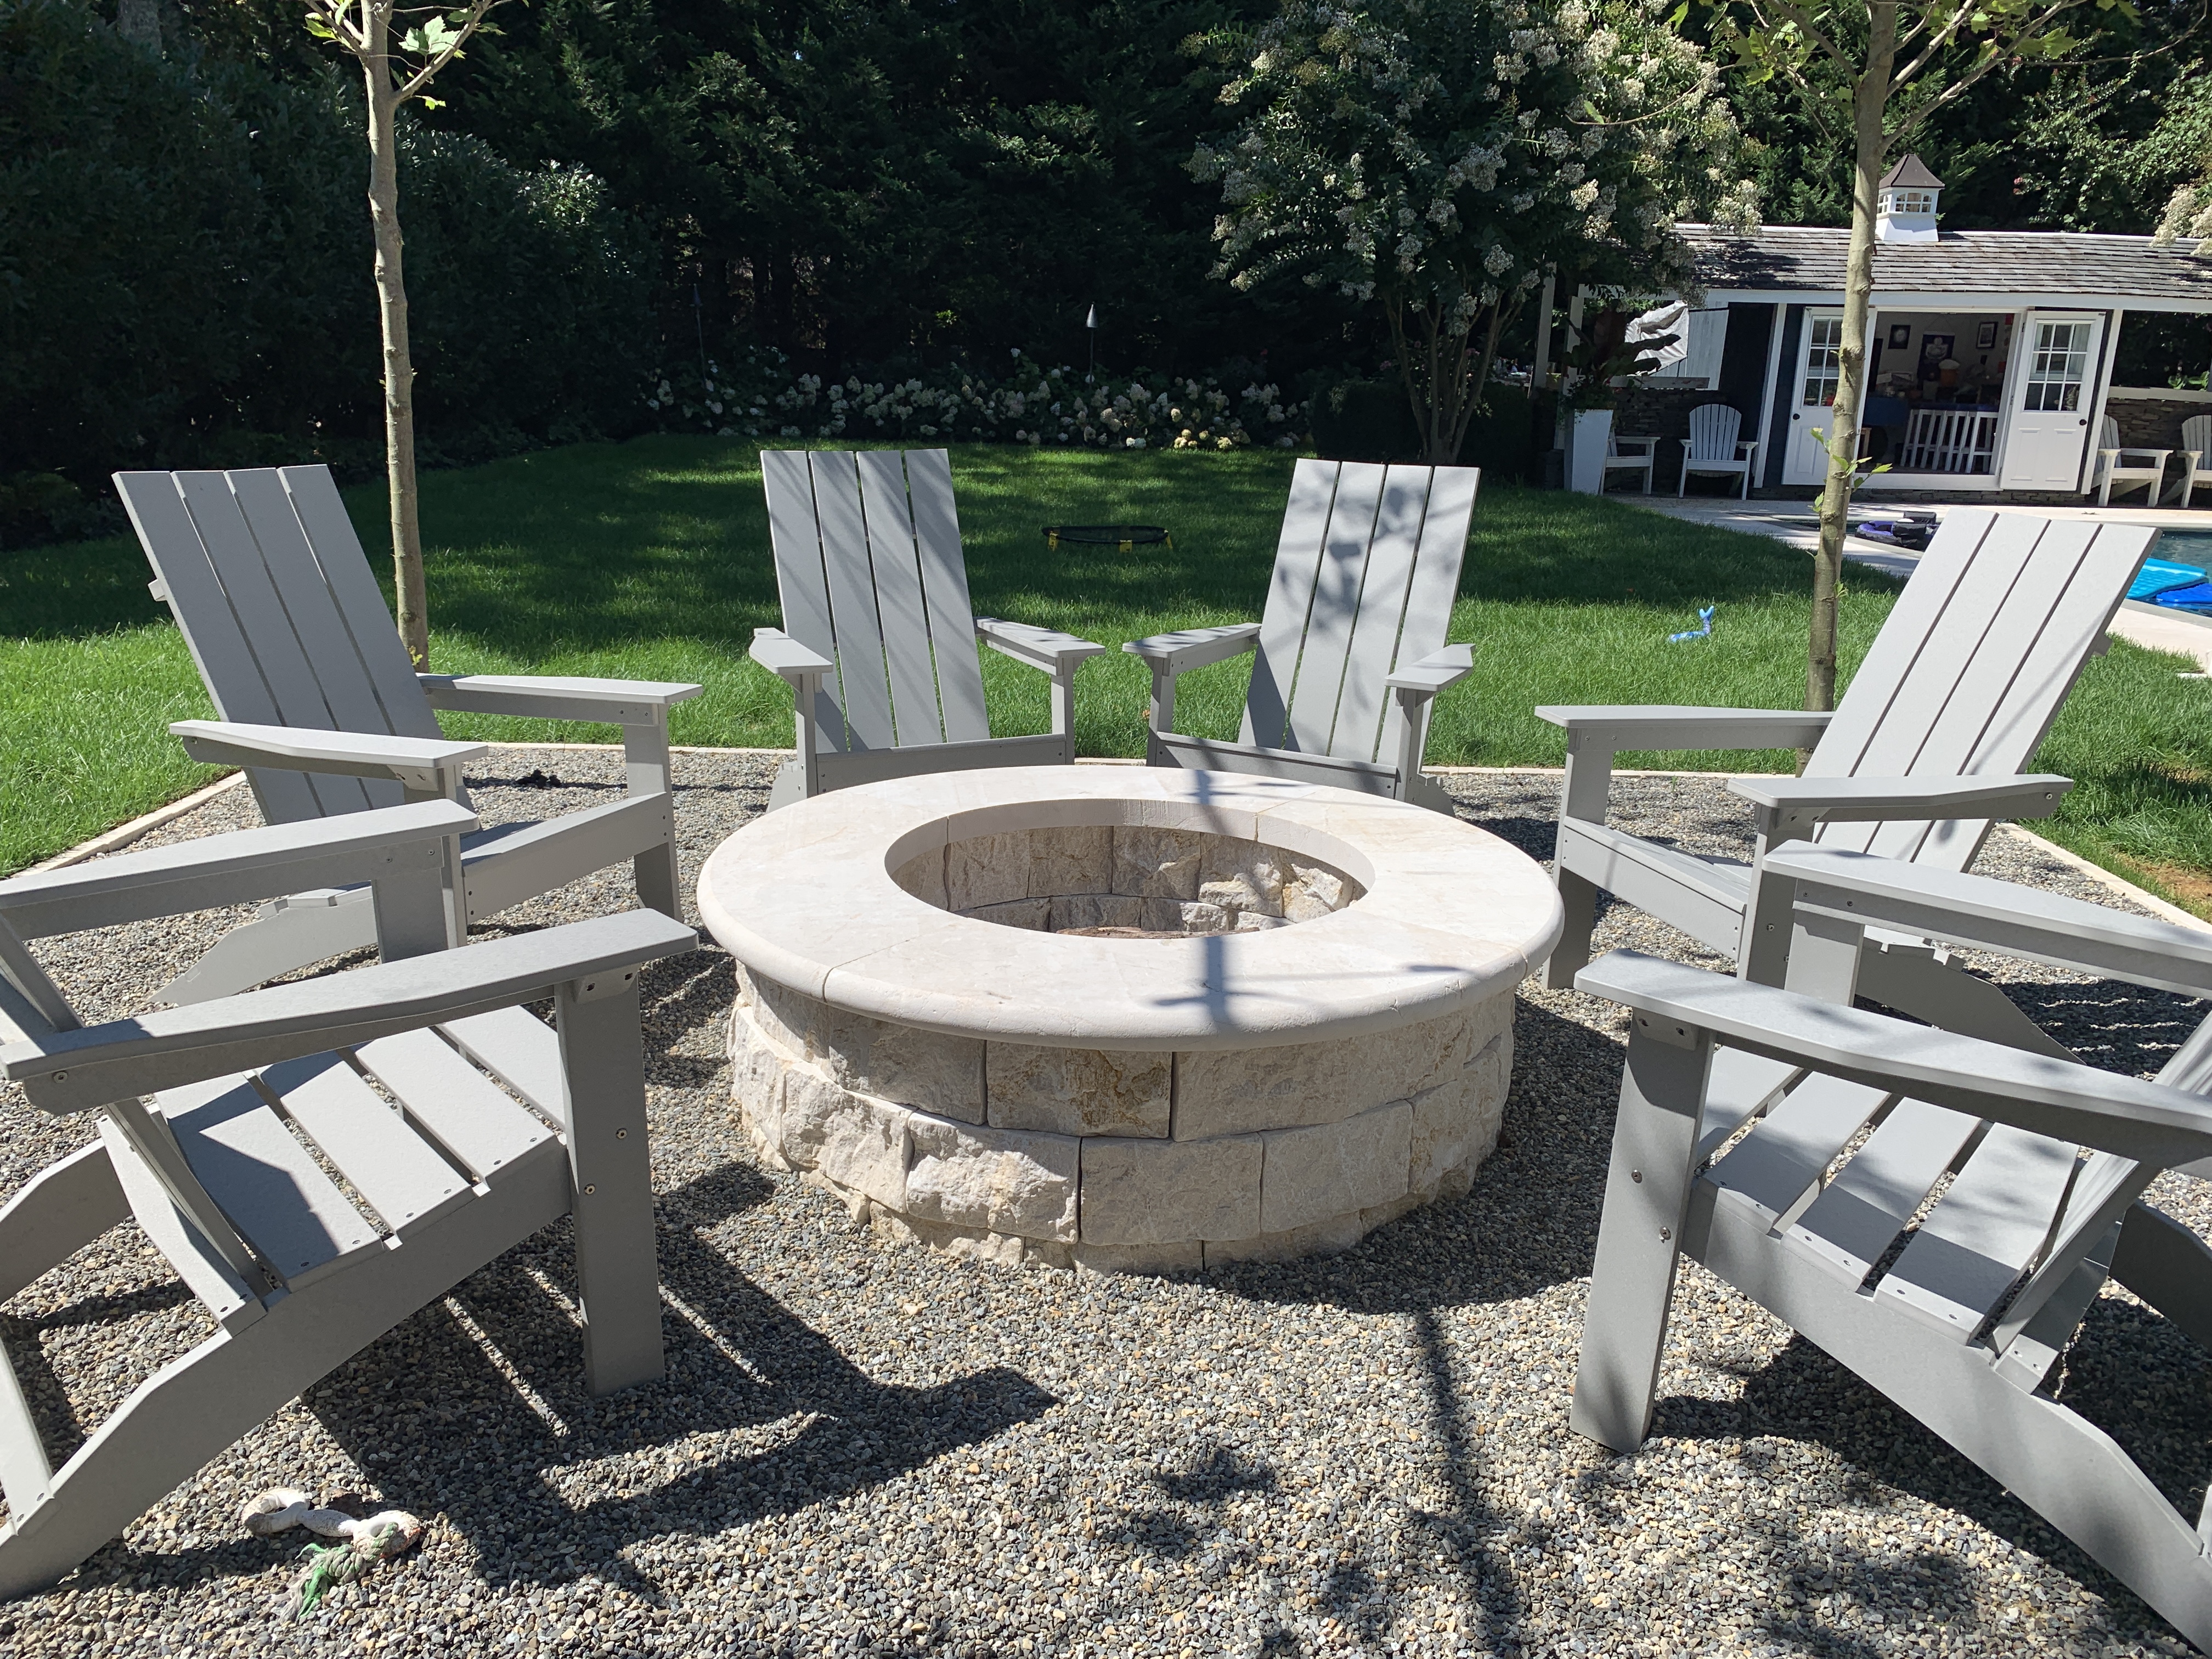 Fire Pits Marmiro Stones, Pictures Of Fire Pits